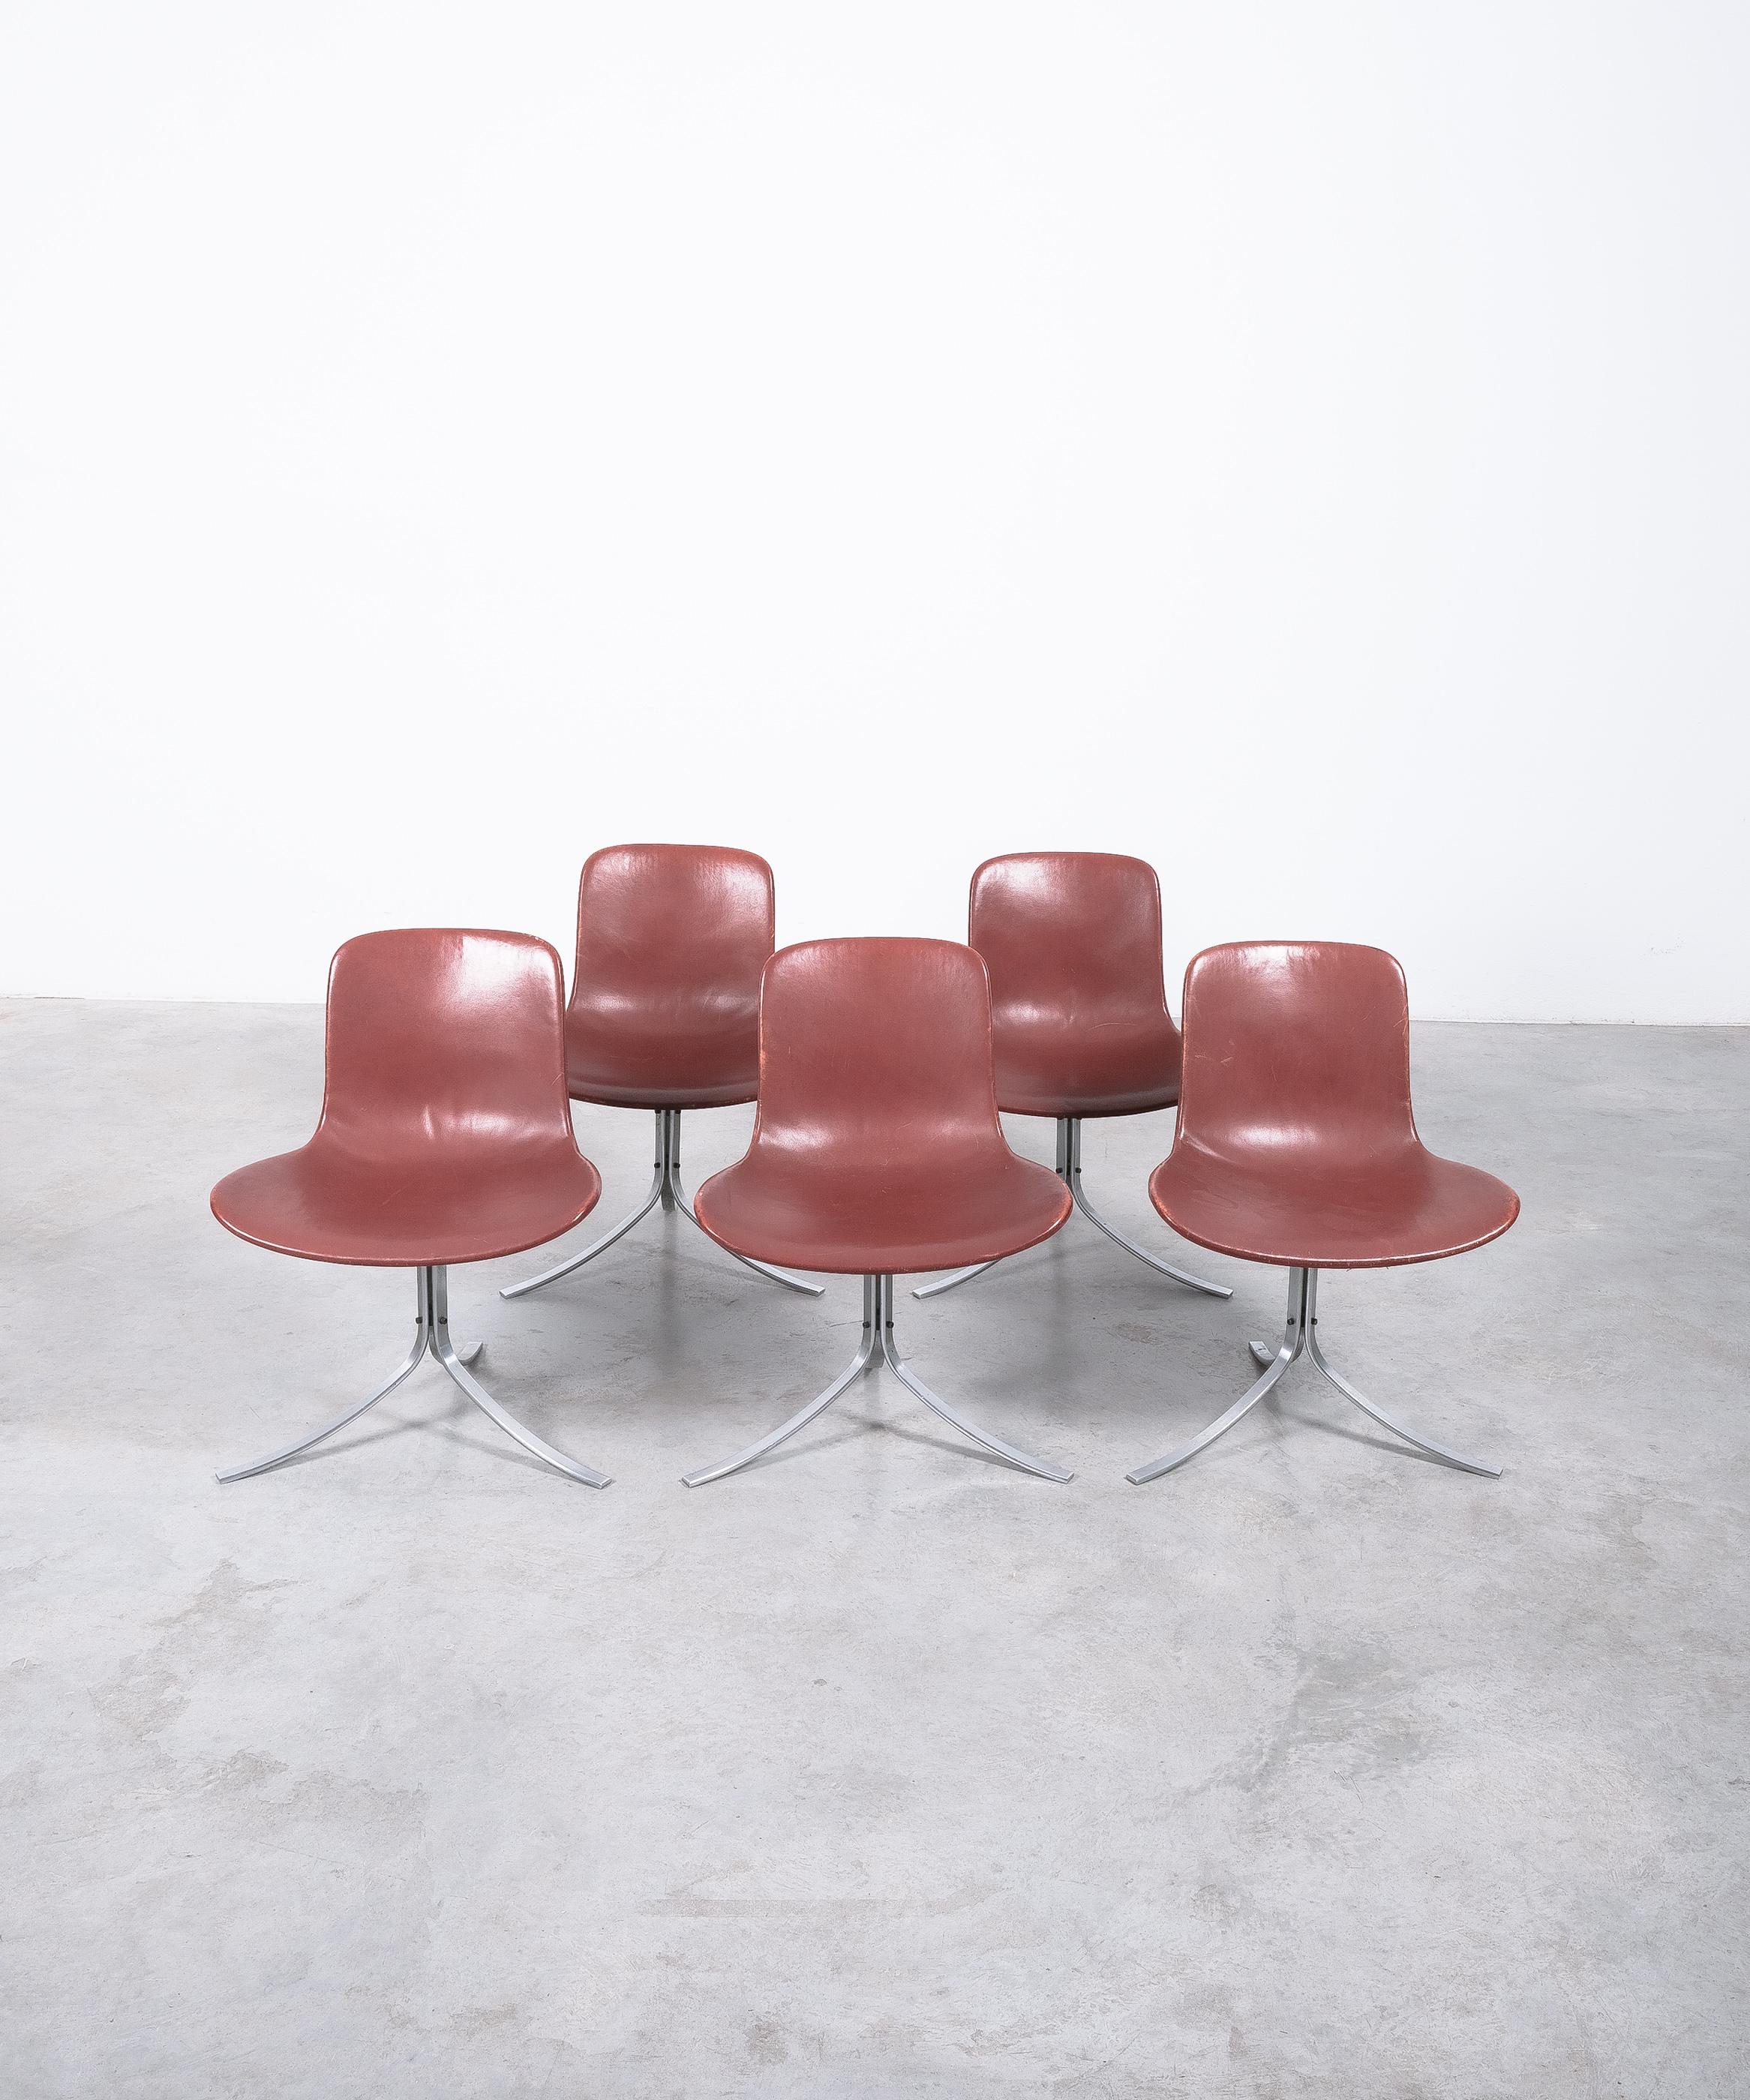 Early original 1960's PK9 chairs for E. Kold Christensen (marked), produced circa 1960-1970

This set of 5 chairs will sell individually and are in stunning original condition.  They have been inspected and vetted by Sotheby's specialist as being